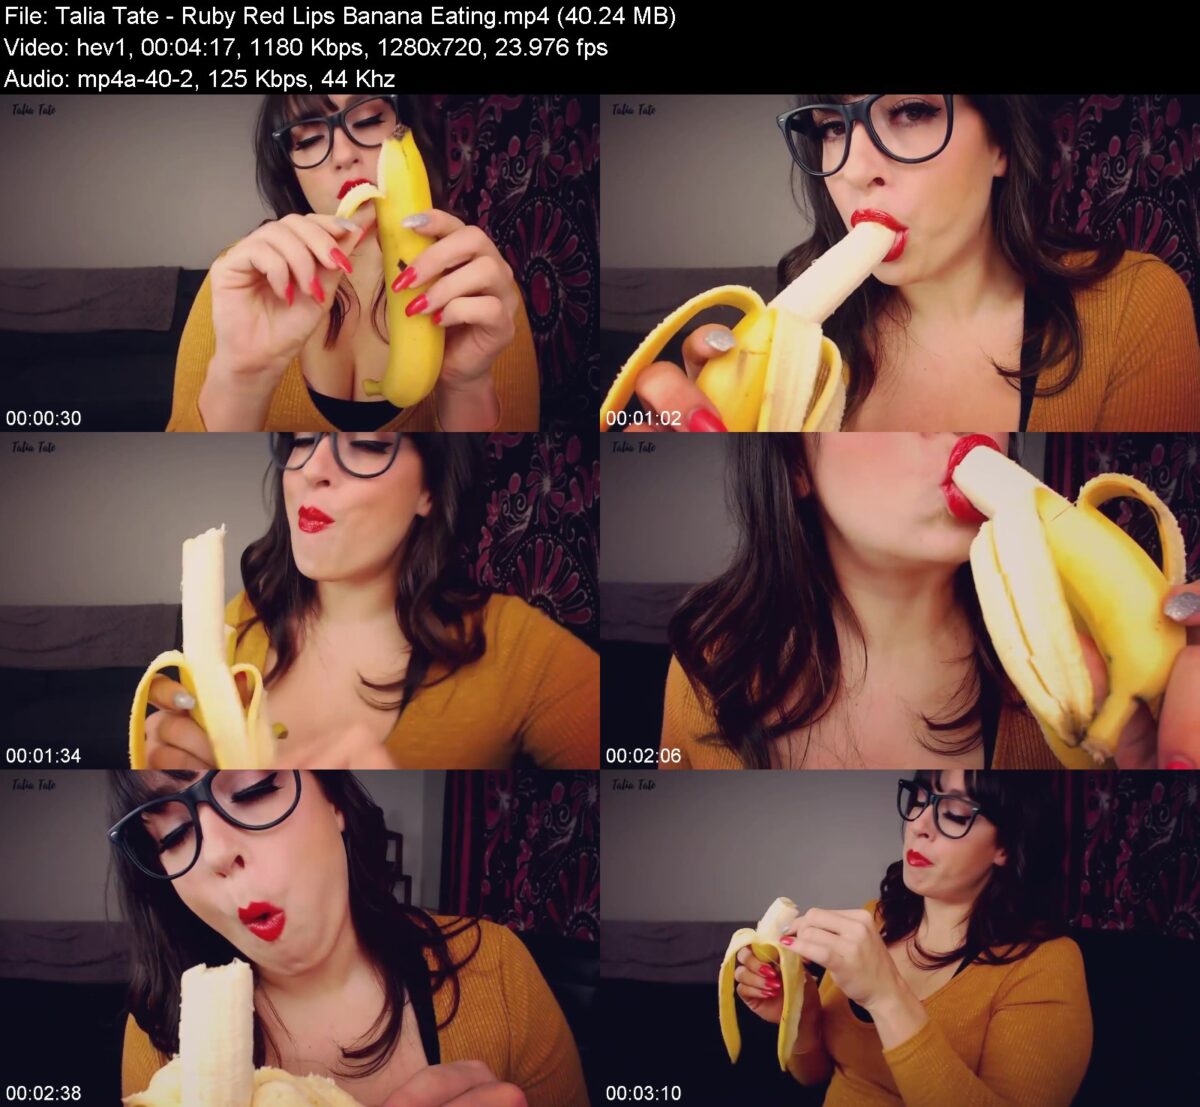 Actress: Talia Tate. Title and Studio: Ruby Red Lips Banana Eating